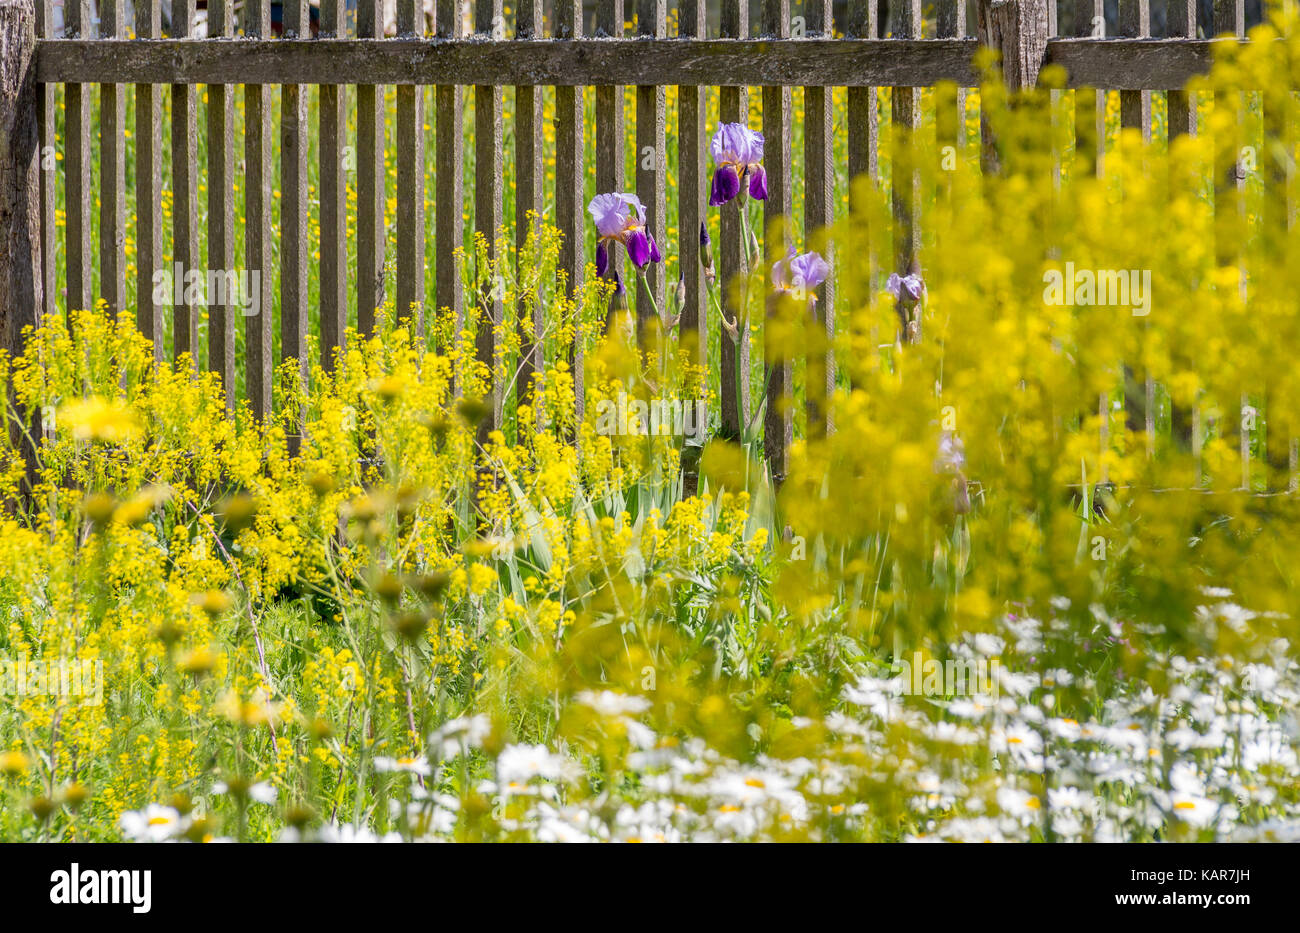 traditional rural herb garden in sunny ambiance at spring time Stock Photo